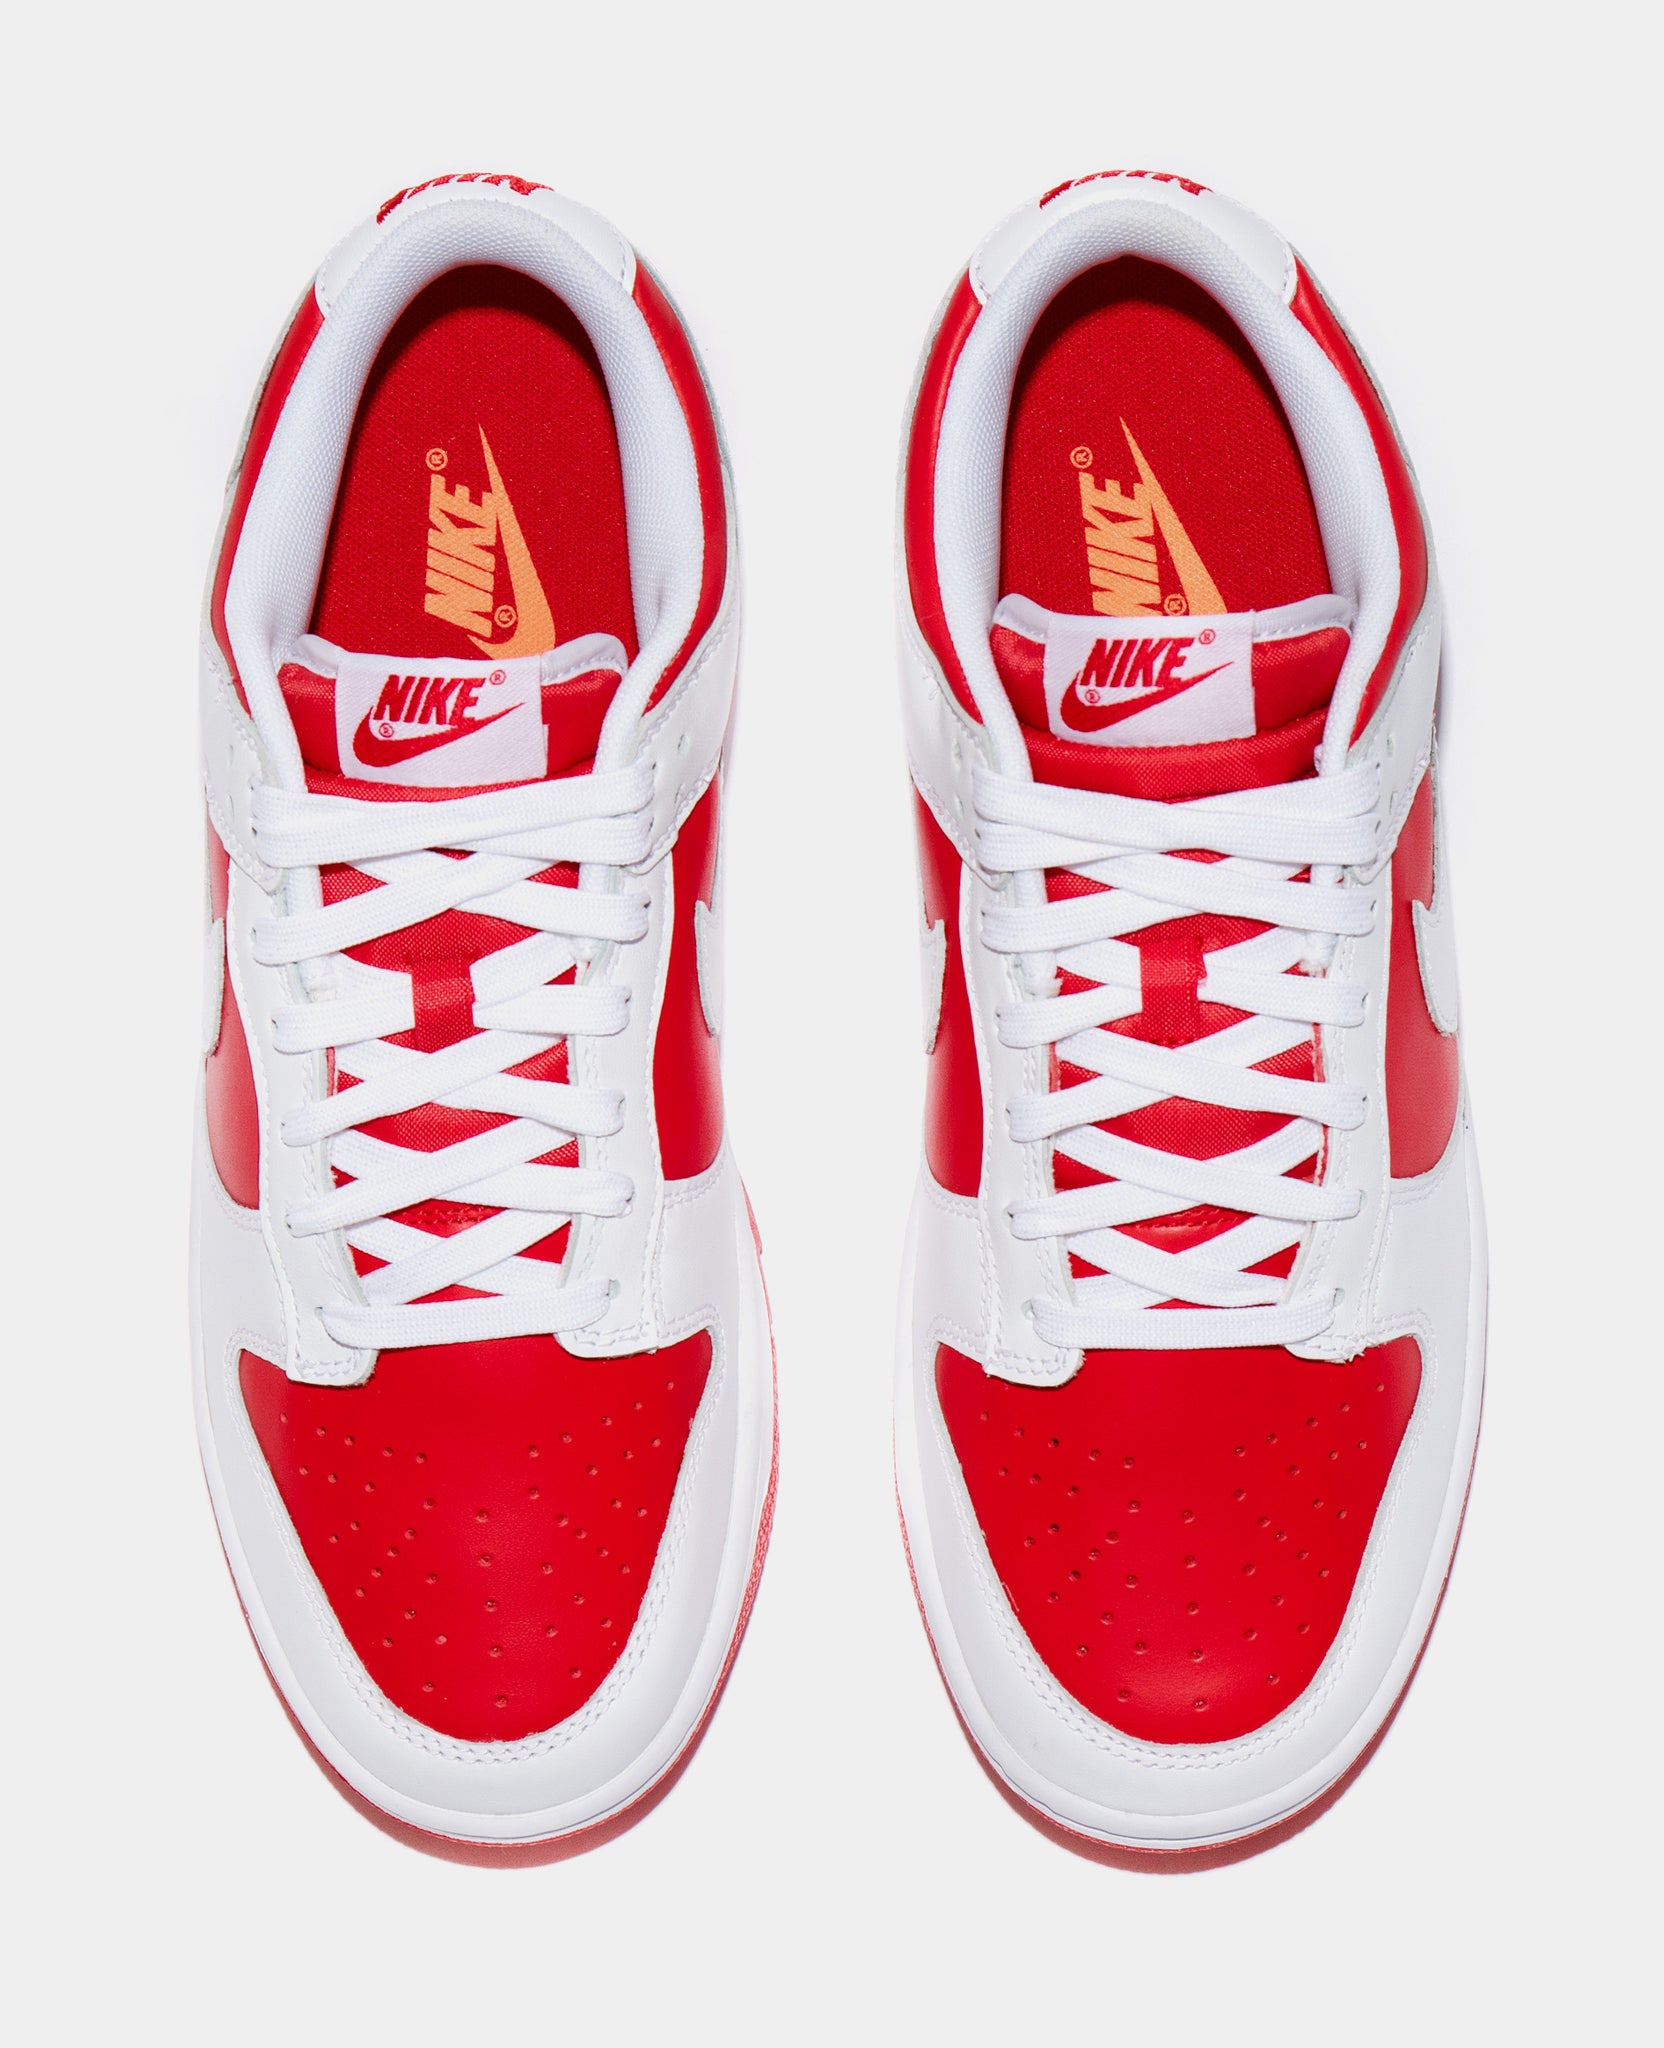 Nike Dunk Low University Red Mens Lifestyle Shoe White Red Limit One Per  Customer DD1391-600 – Shoe Palace